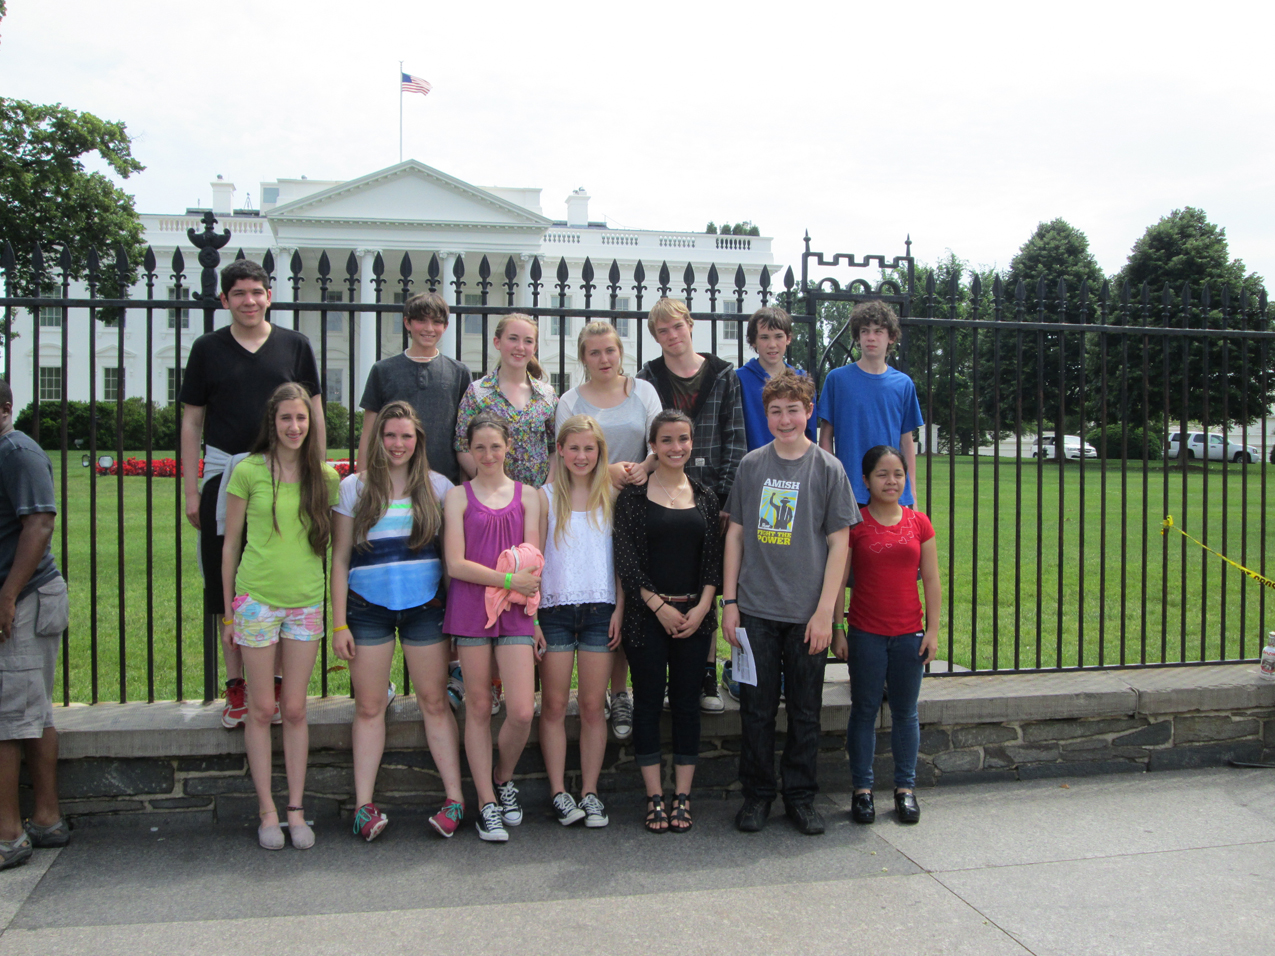 Taking advantage of a photo op in front of the White House are (back row) Miles Cleary, Zane Boyer, Samantha Jacobsen, Uliana Reutov, Bryce Donich, Kannen Cabana, Rowan Biessell; and (bottom row) Audrey Rosencrans, Malina Fellows, Megan Pitzman, Izabelle Hagge, Desiree Cleary, Sam Neilson and Chloe Adkinson.-Photo provided